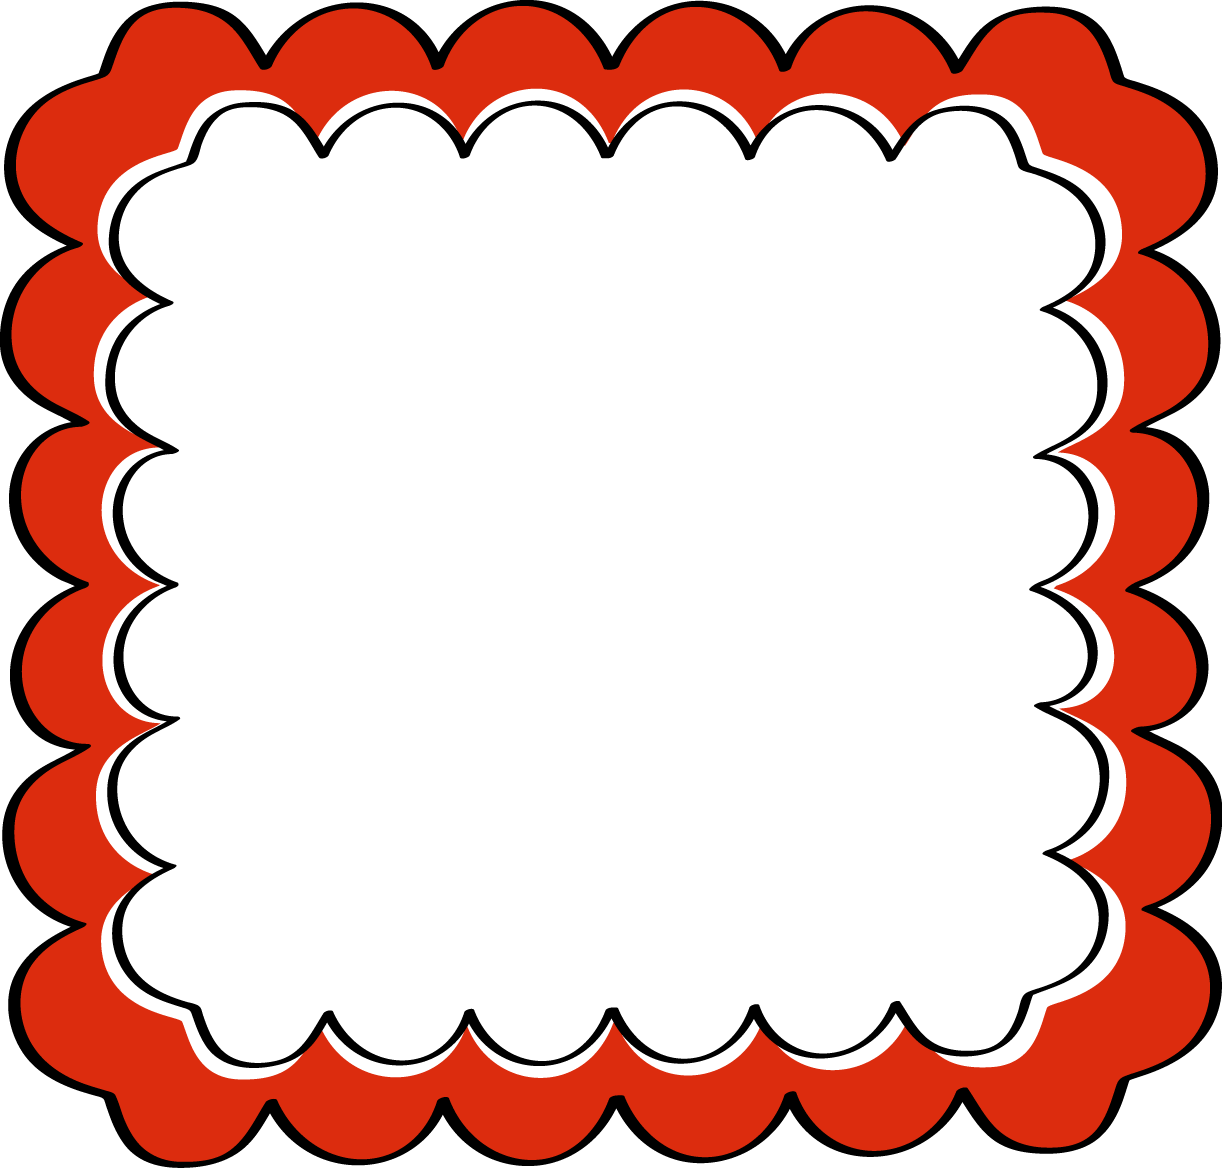 red frame clipart - photo #30